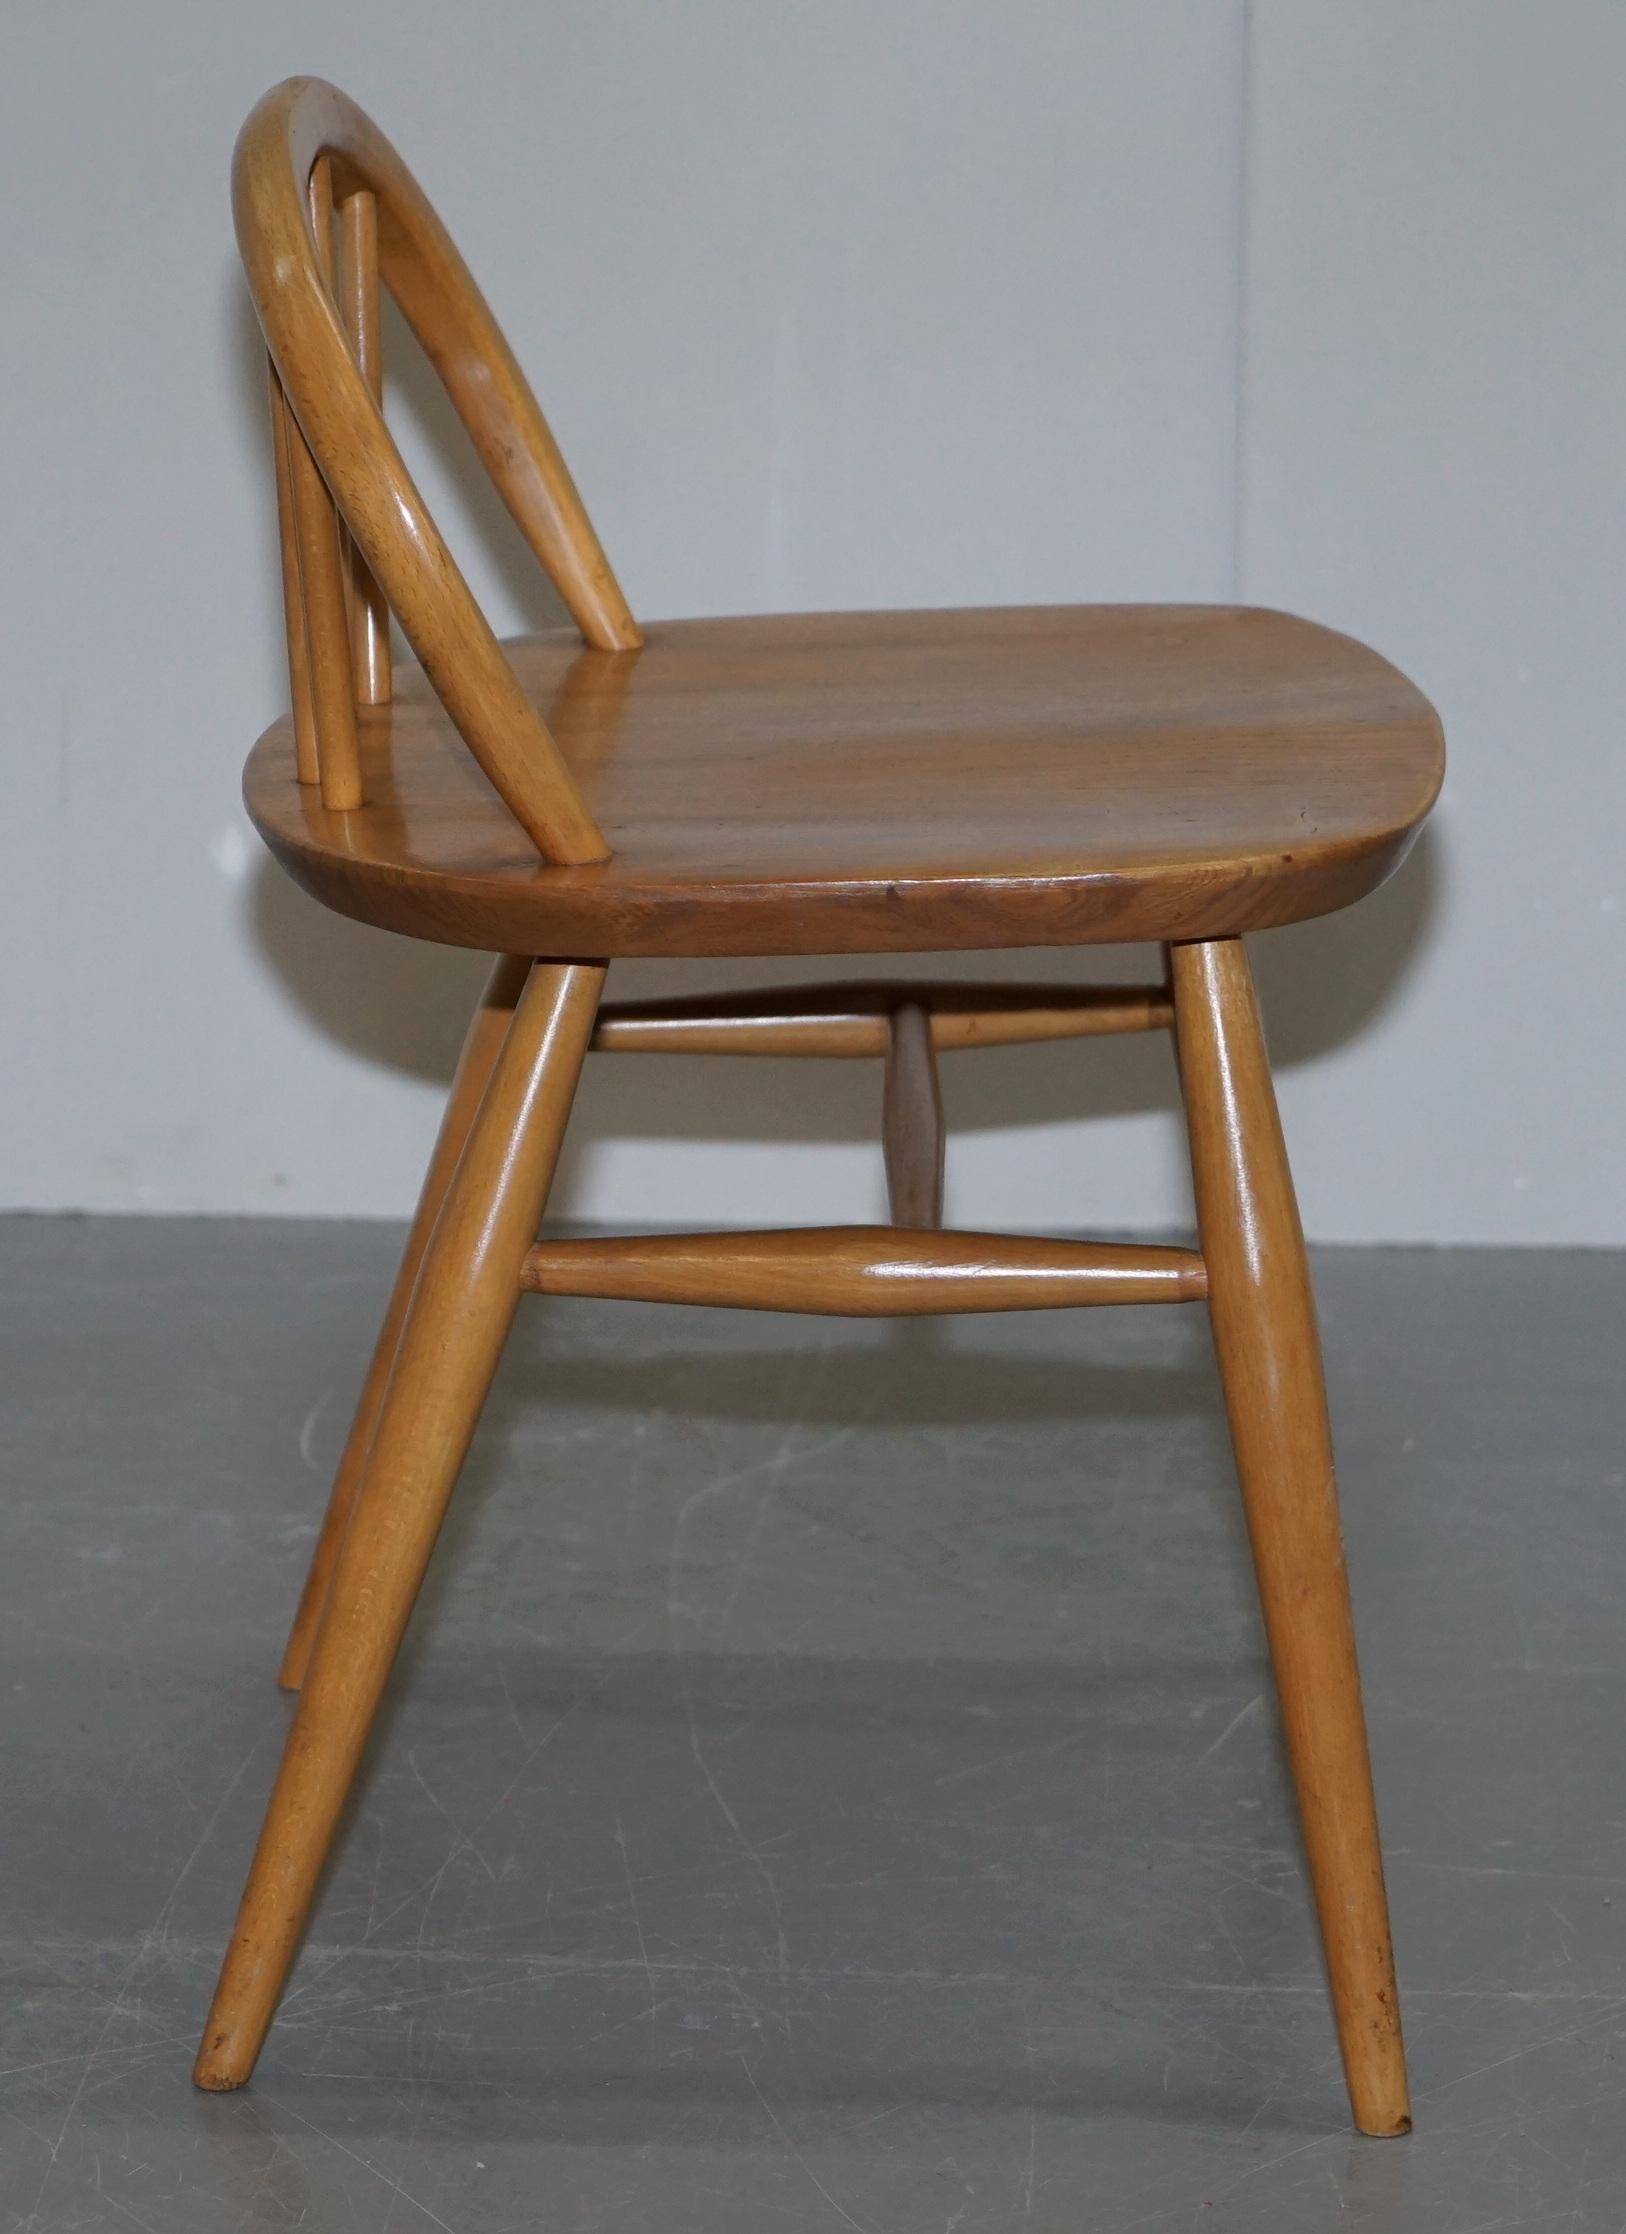 Stunning Small G Plan Ercol Blond Elm Wood Side Chair Dressing Table Stool 1